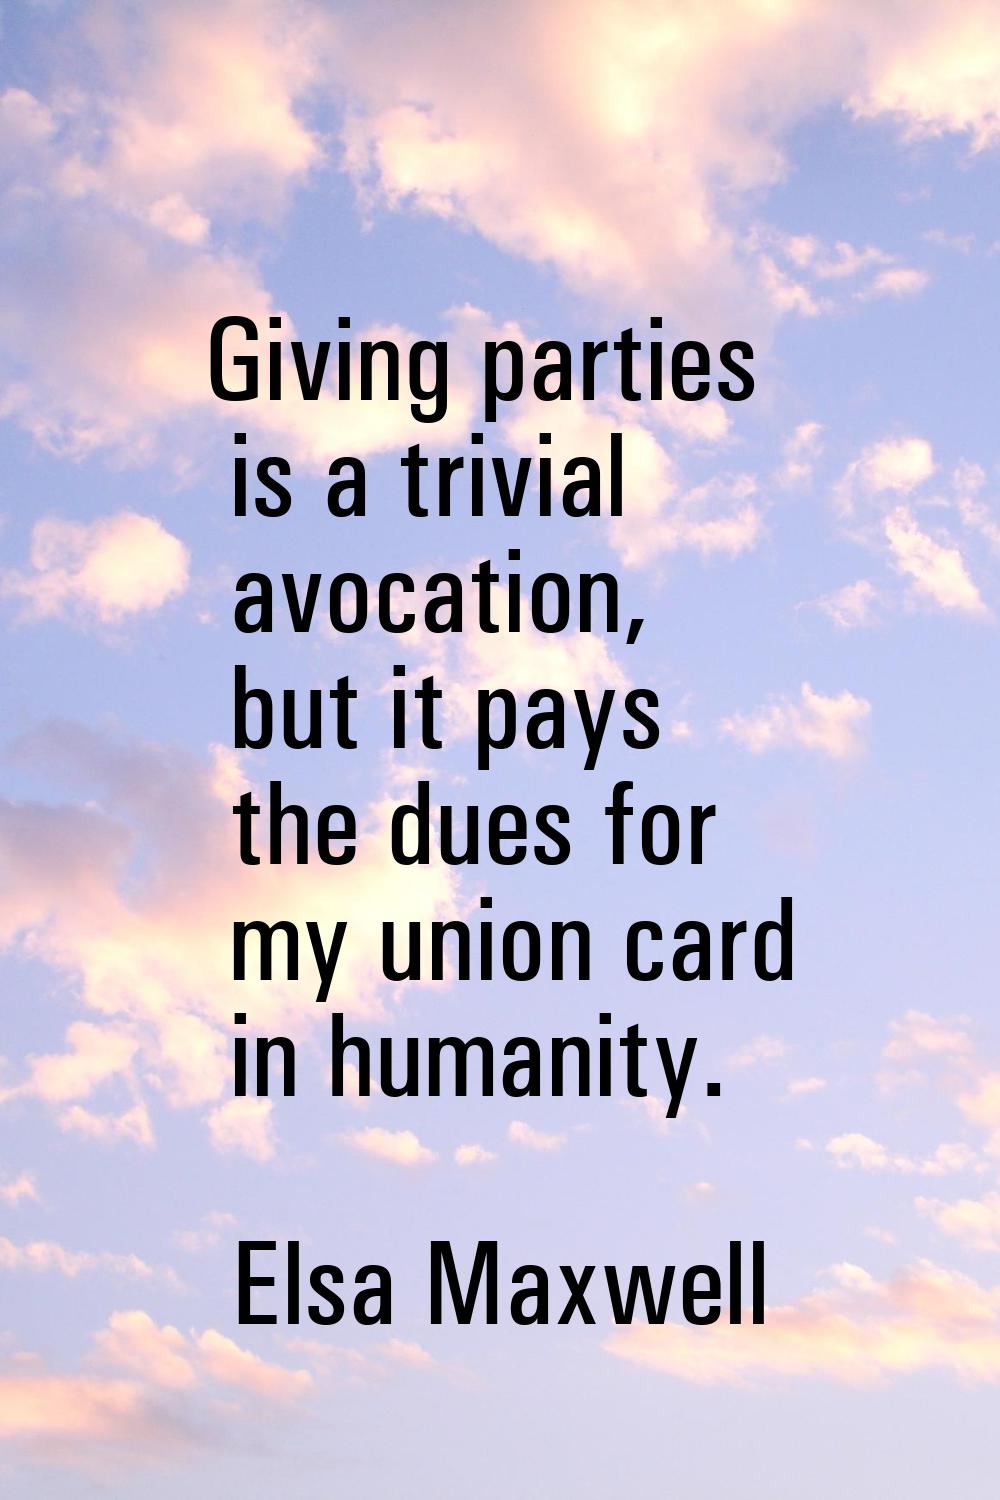 Giving parties is a trivial avocation, but it pays the dues for my union card in humanity.